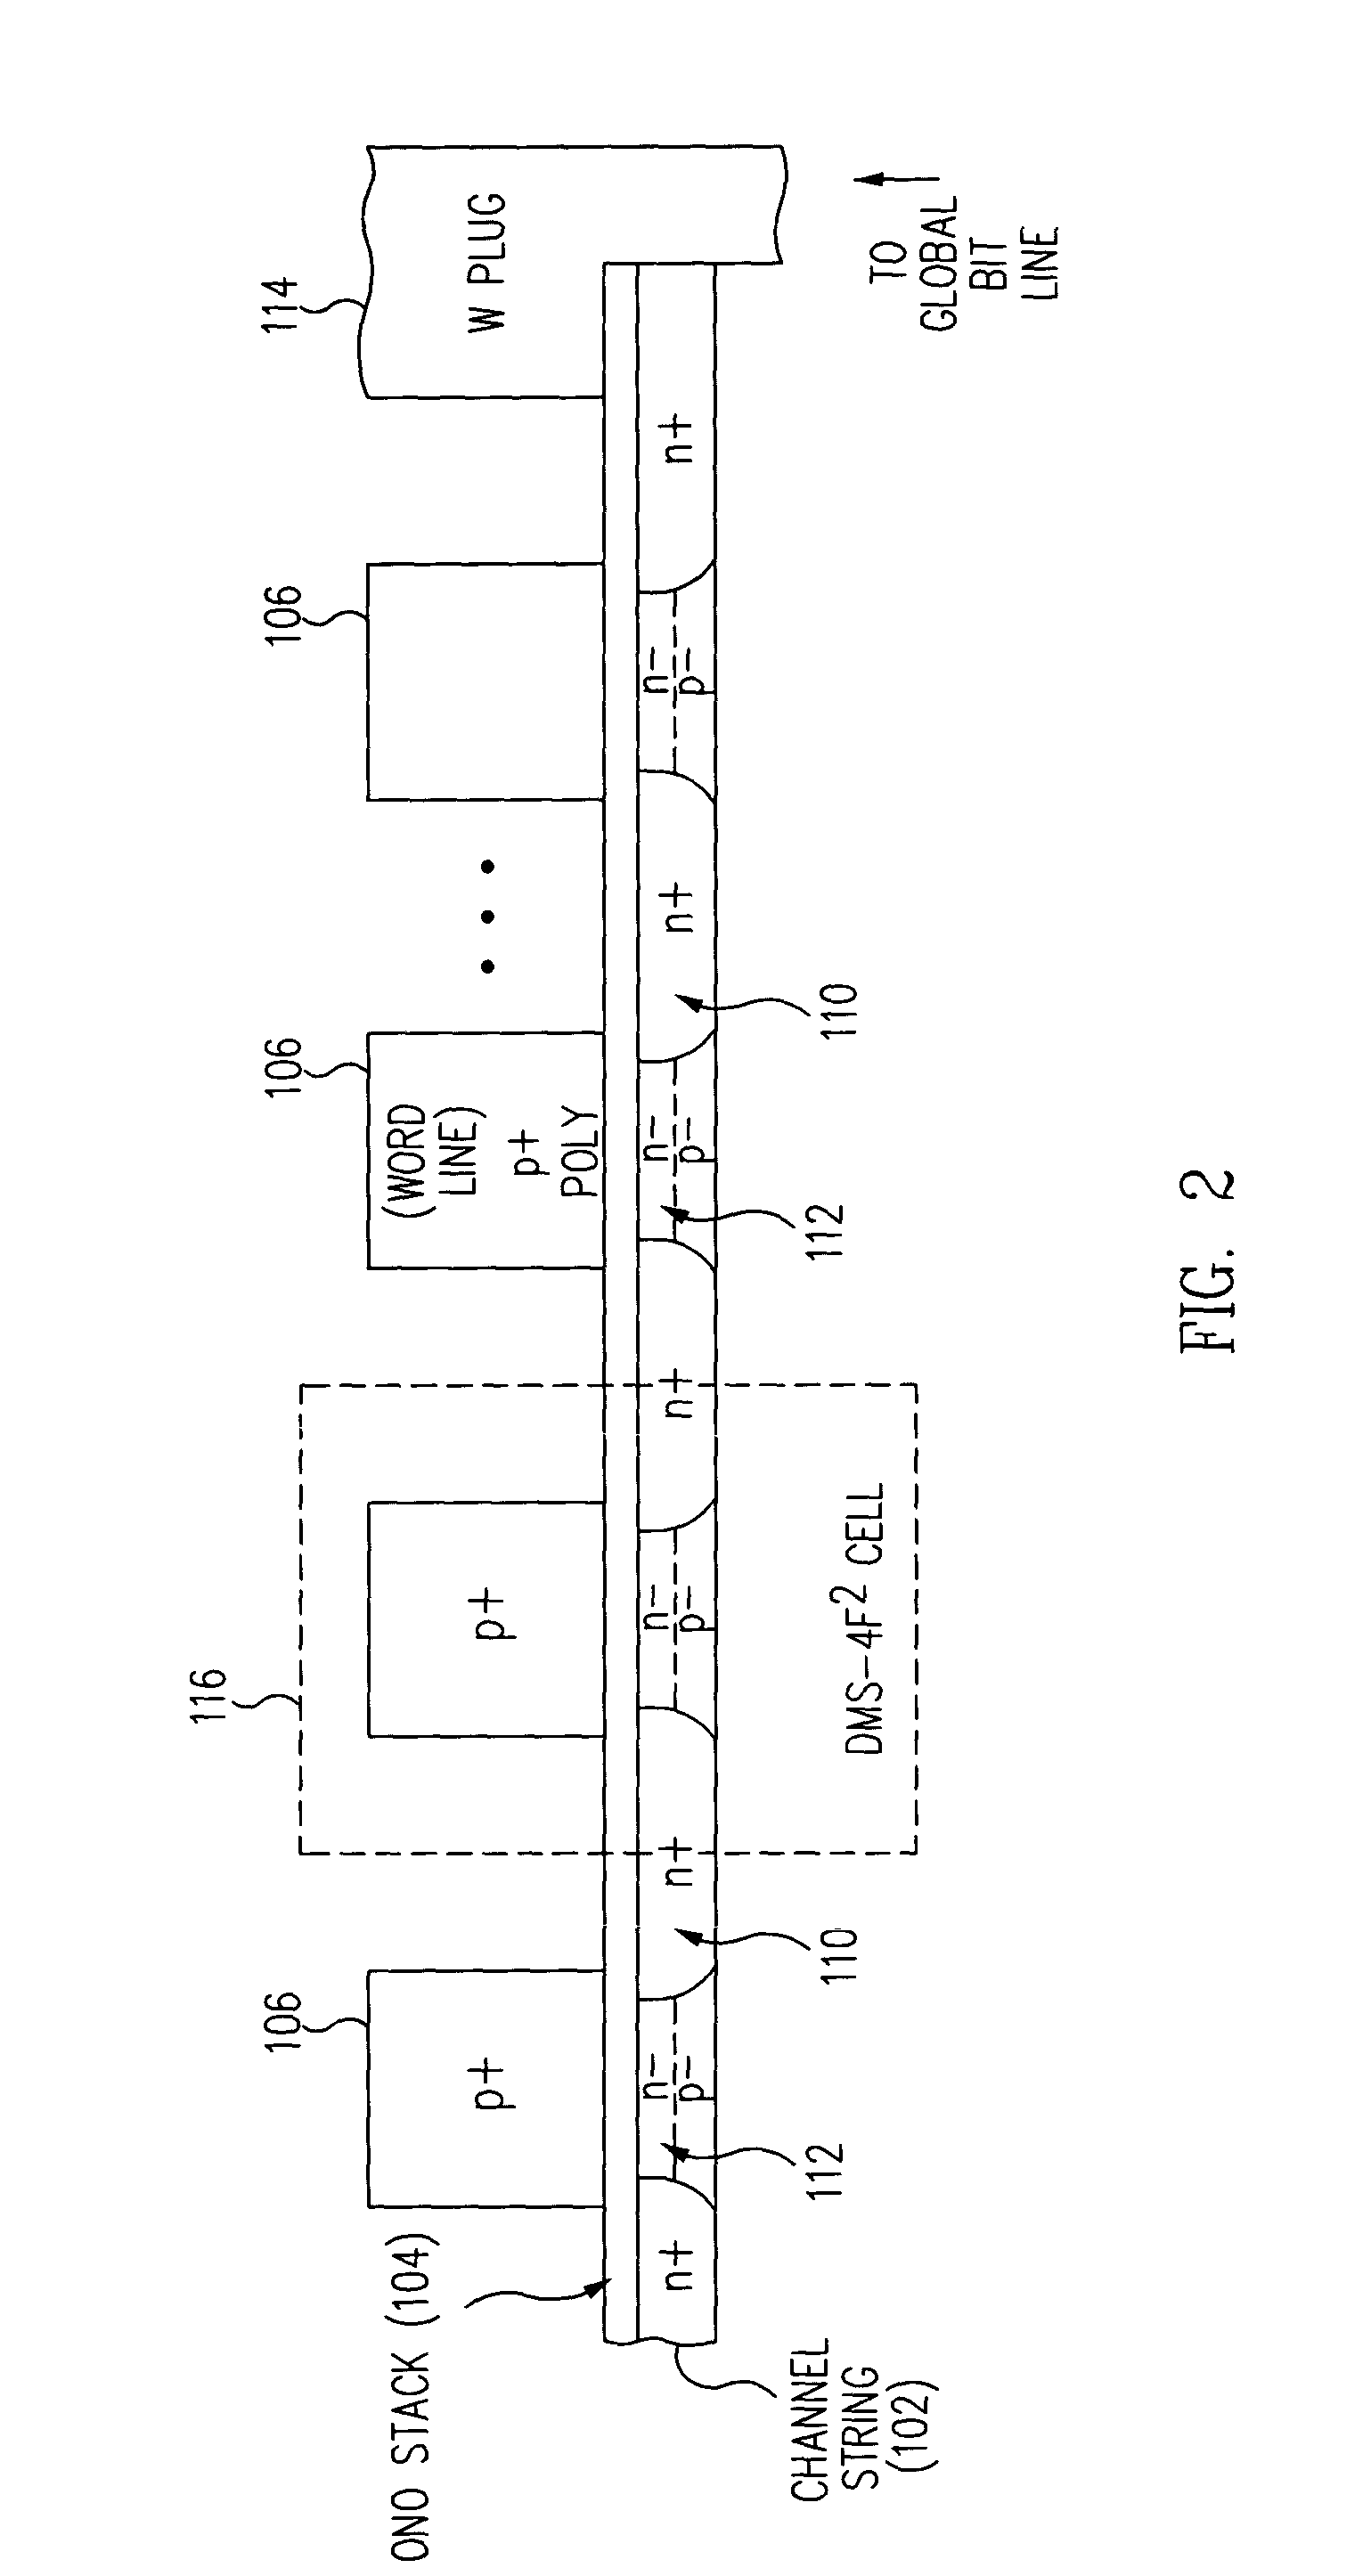 Method for fabricating programmable memory array structures incorporating series-connected transistor strings